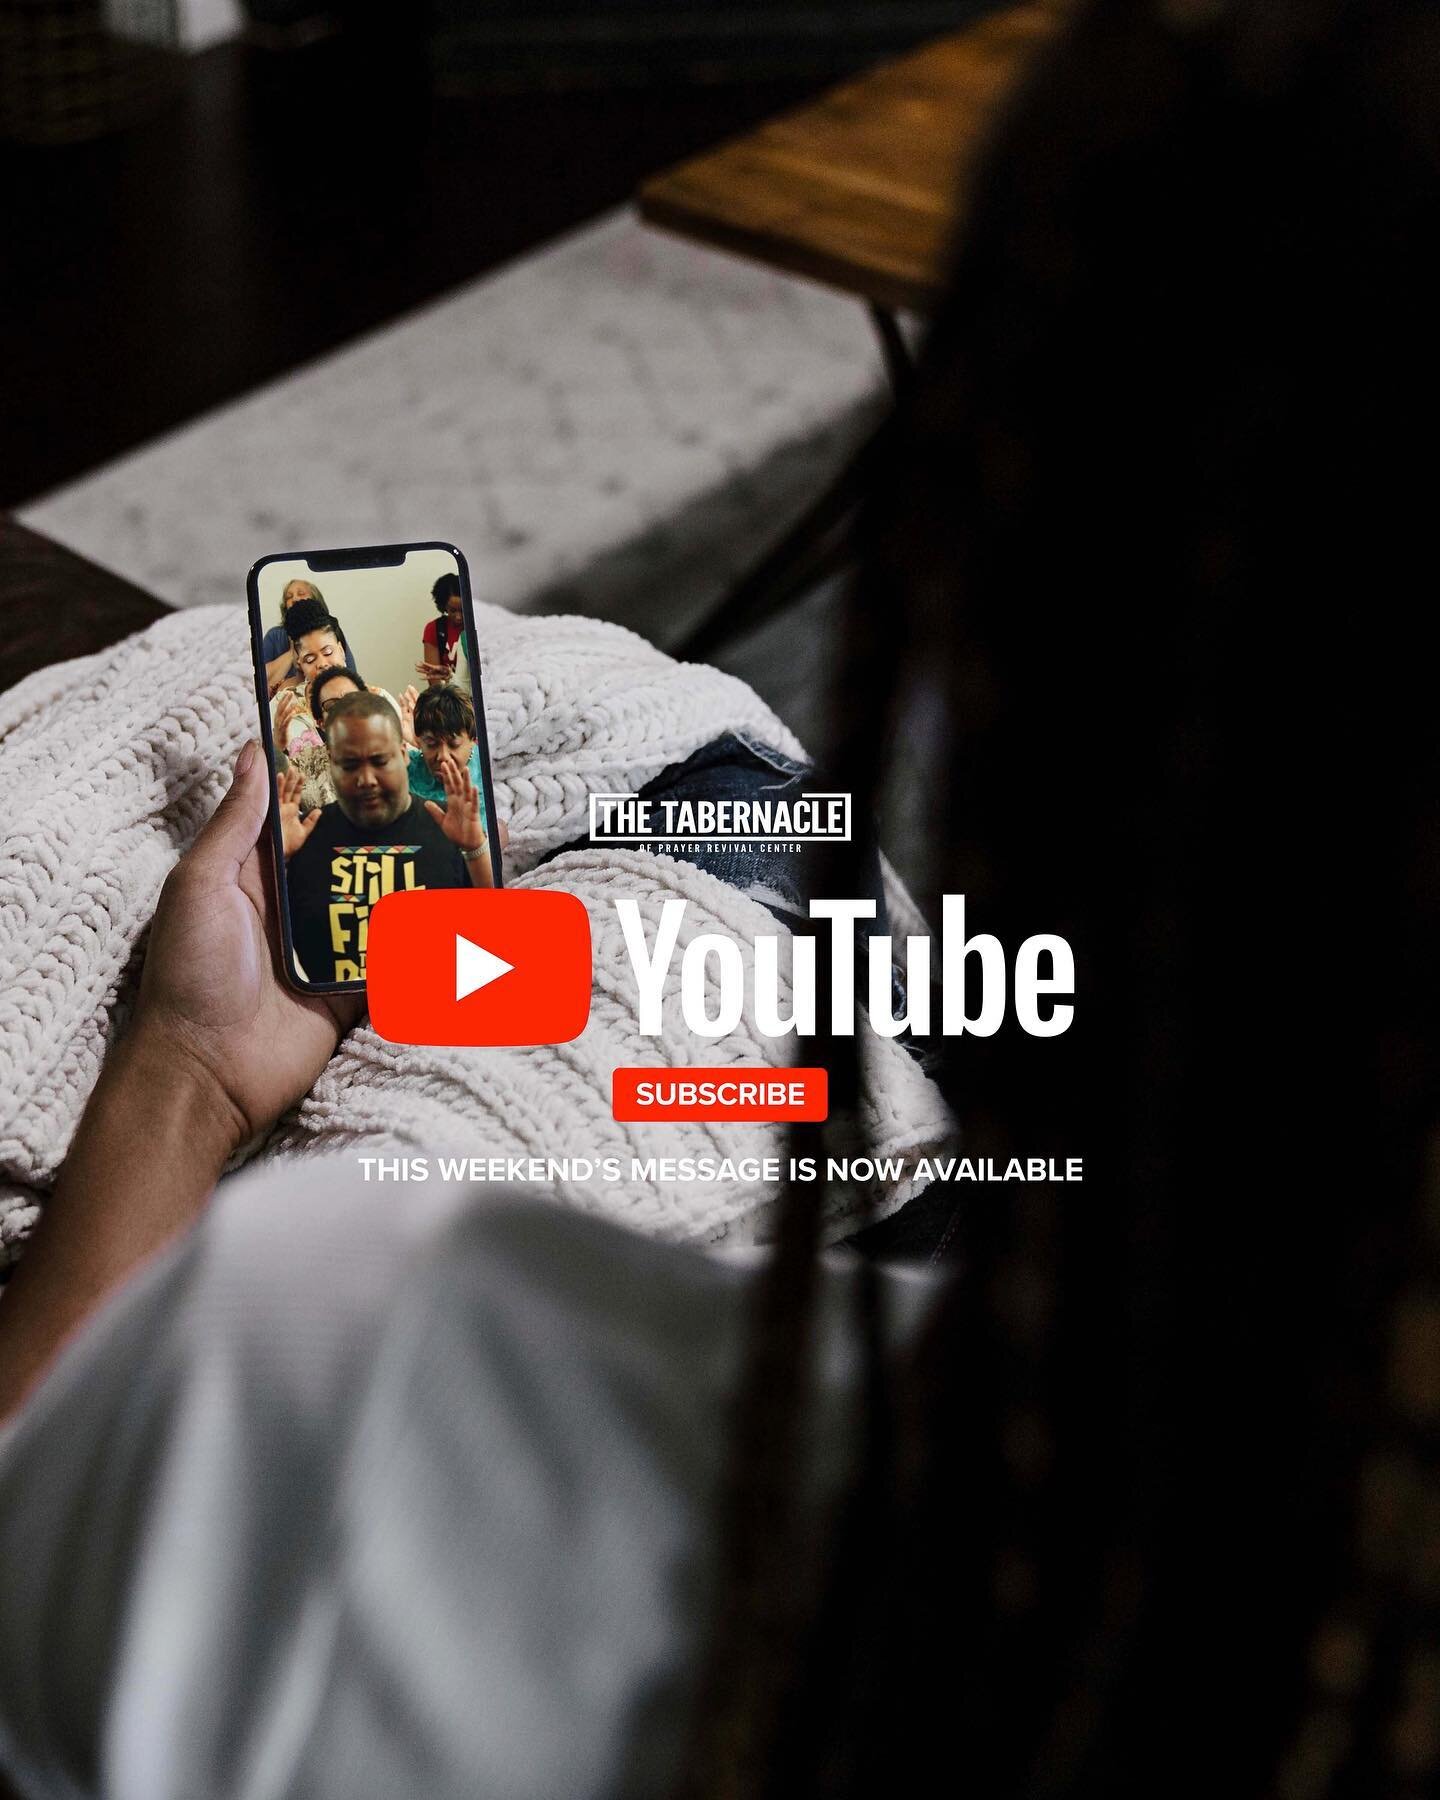 Go subscribe to our YouTube channel!

#thetabernacle #toprc #sermonoftheweek